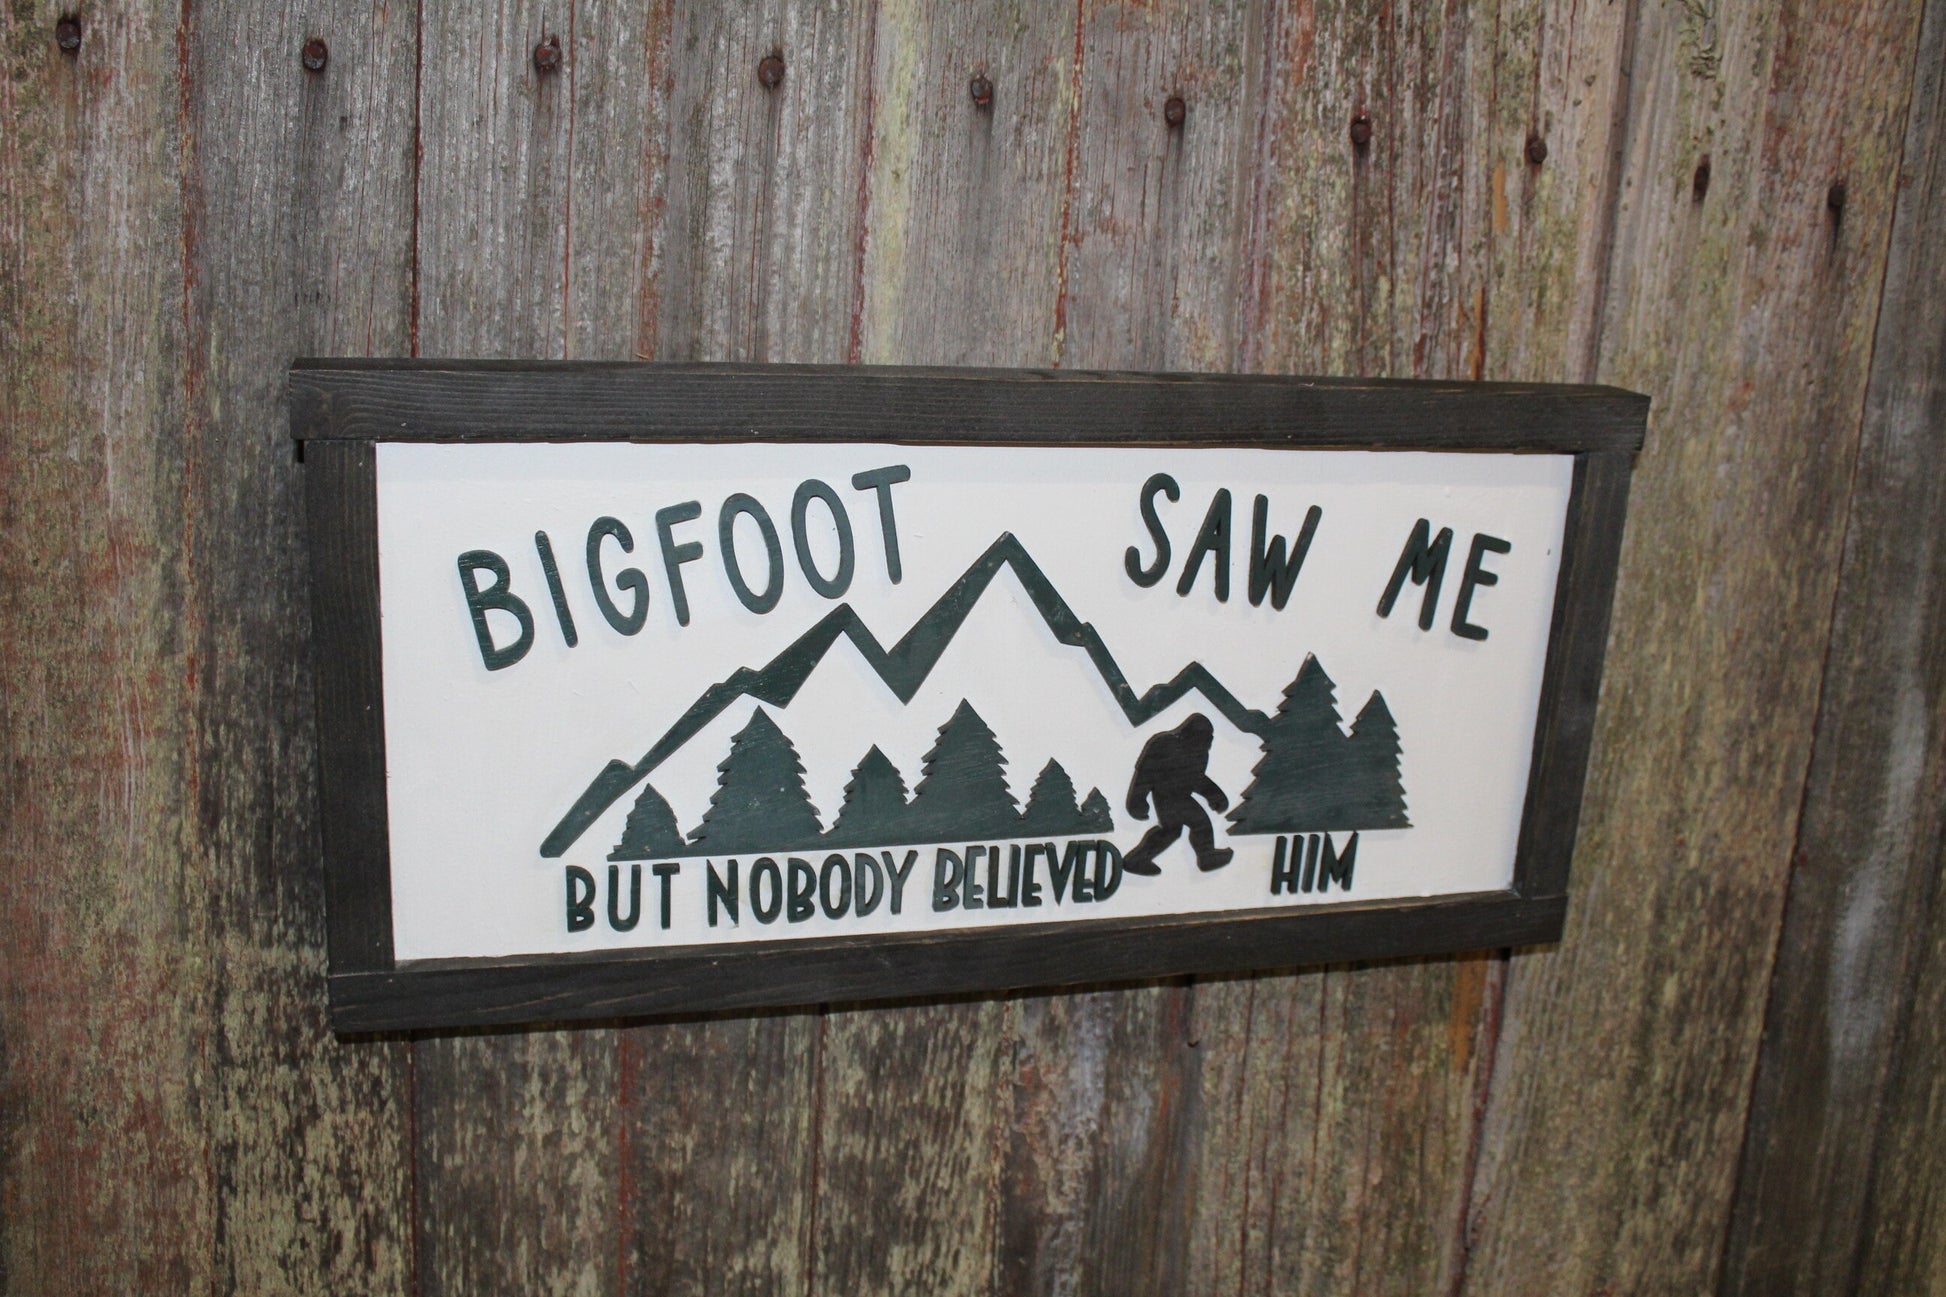 Bigfoot Saw Me But Nobody Believed Him Believer 3D Wood Sign Country Primitive Wall Hanging Decoration Mountains Joke Goofy Funny Rustic